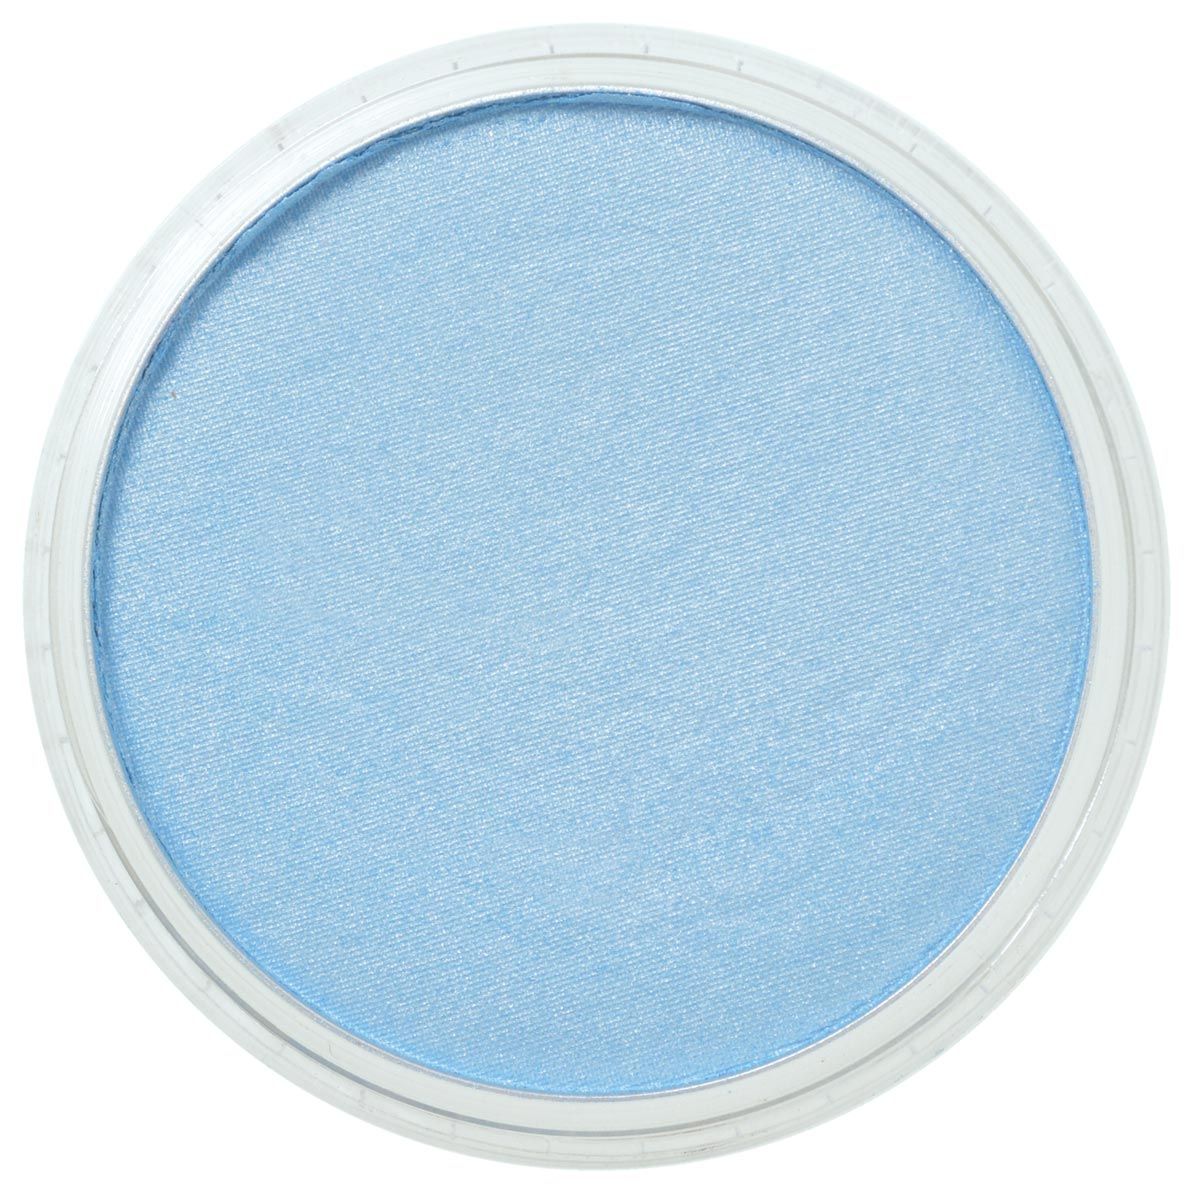 Pan Pastel Pearlescent Blue 955.5